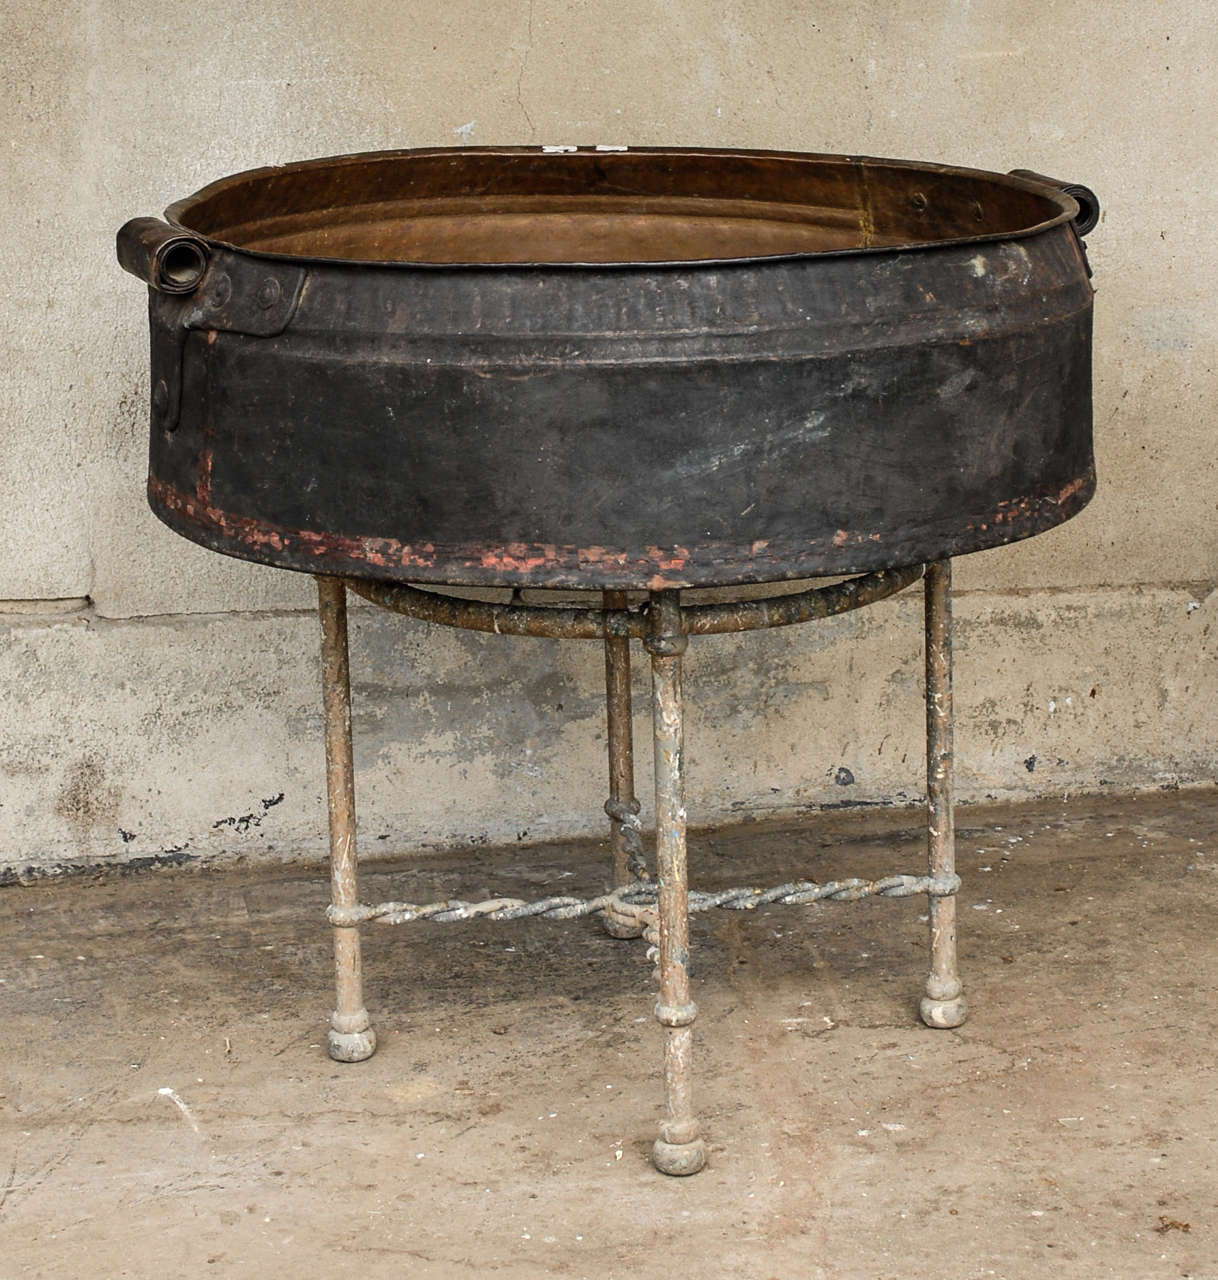 A very large South Indian hand-hammered copper vessel with rolled and riveted handles from the 19th century. The stand shown in the picture is not included.